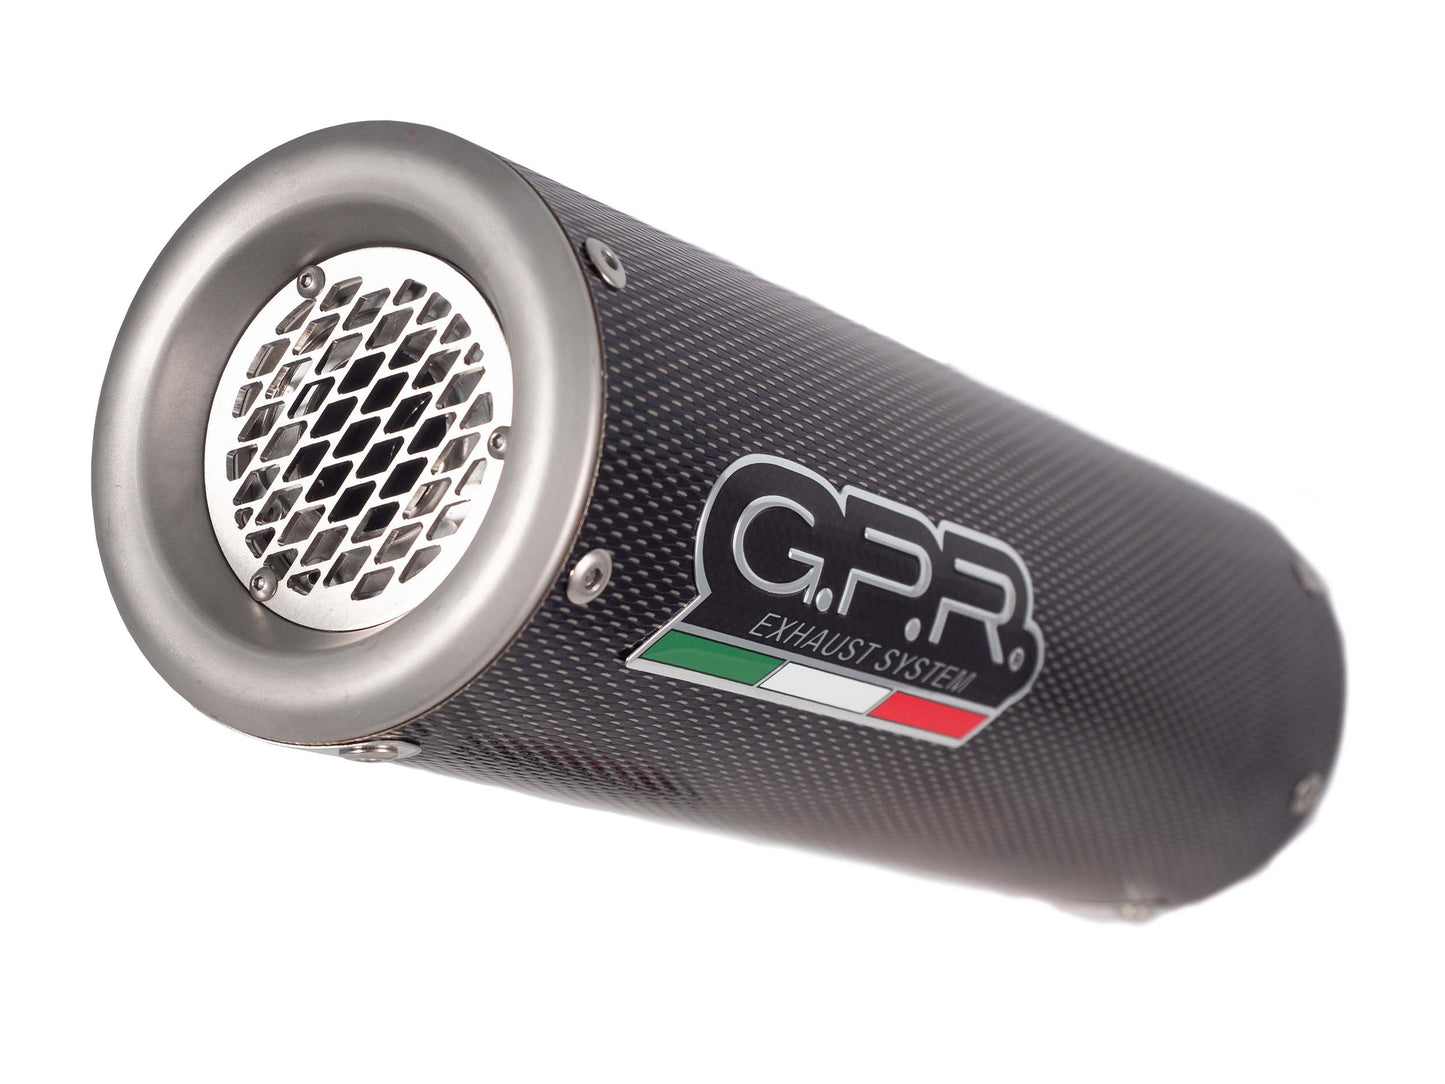 GPR Exhaust for Bmw F850GS - Adventure 2021-2022, M3 Poppy , Slip-on Exhaust Including Removable DB Killer and Link Pipe